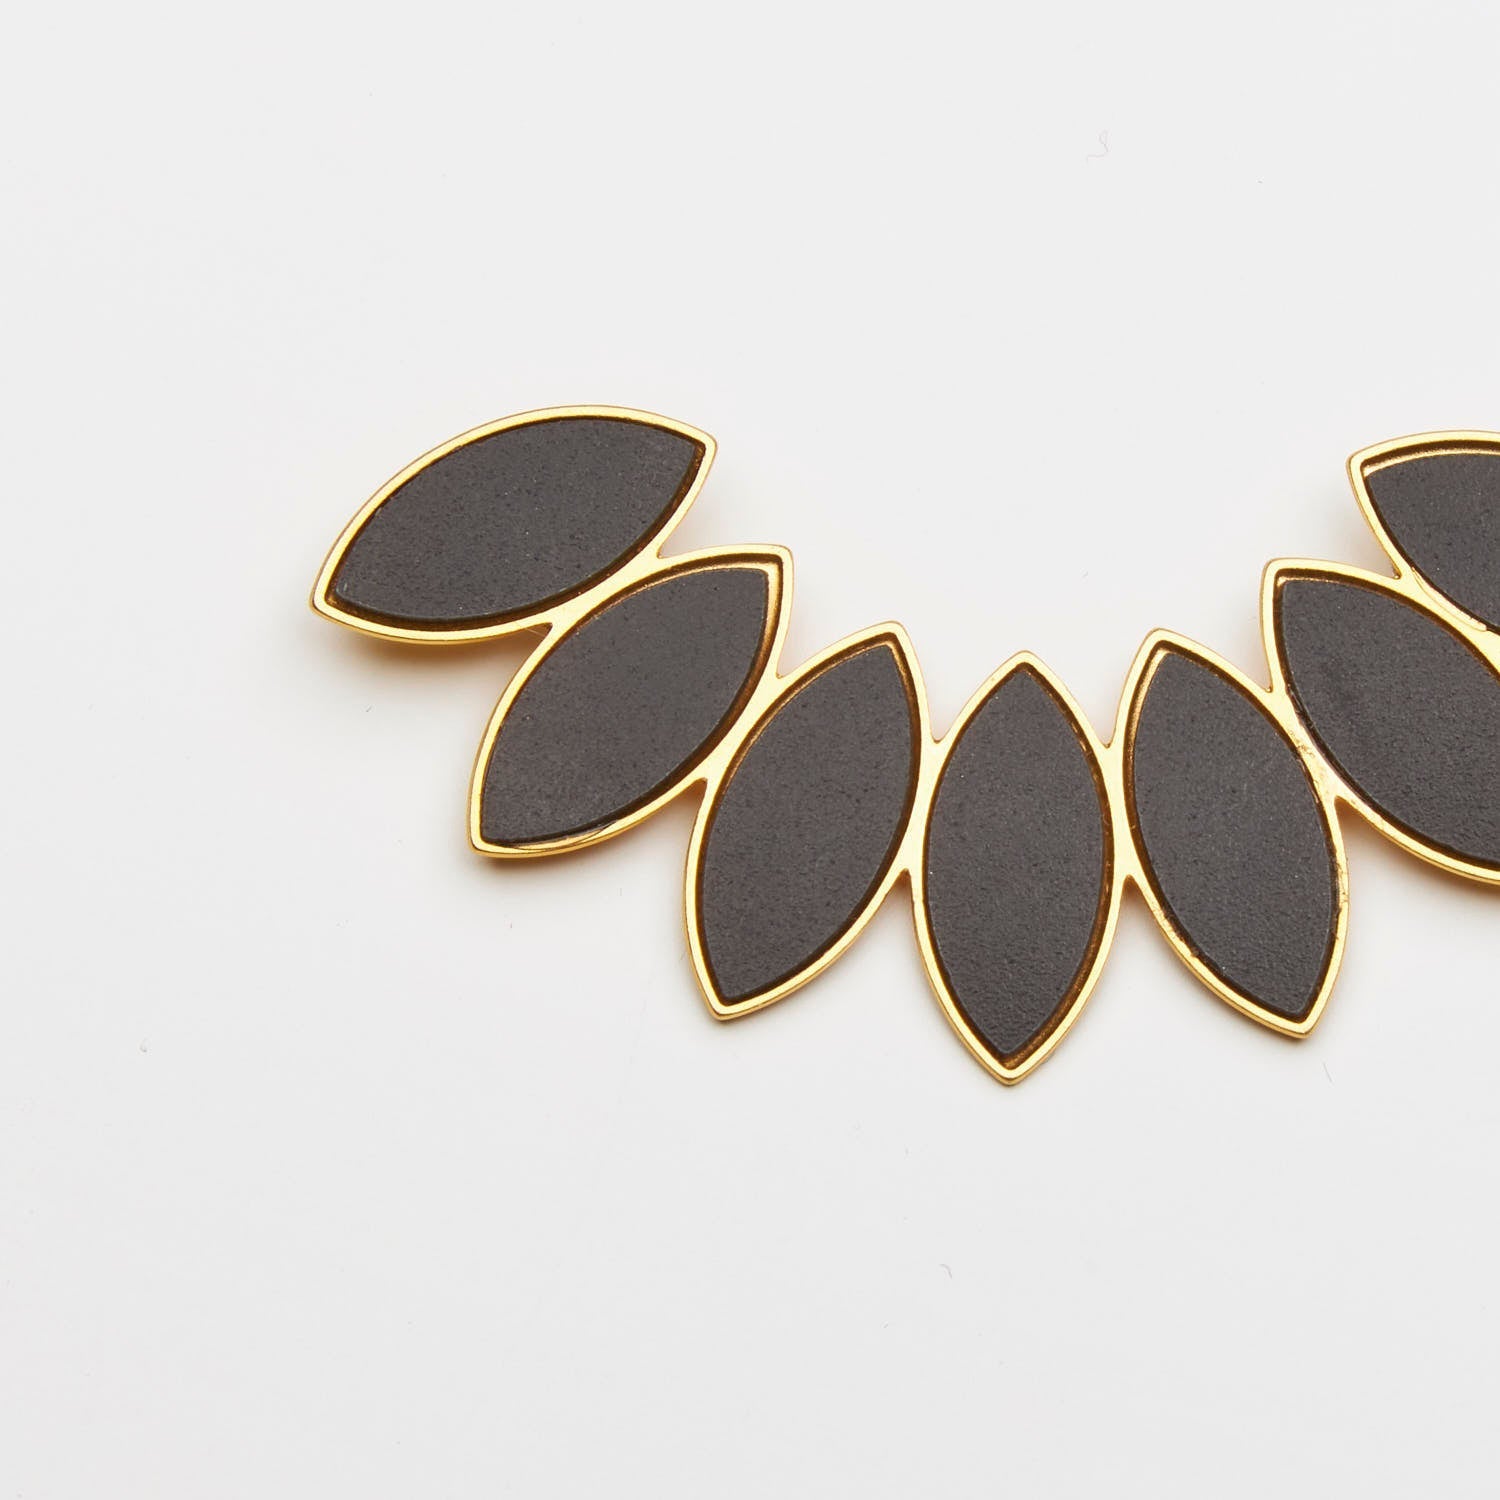 Black marquise | Gold necklace